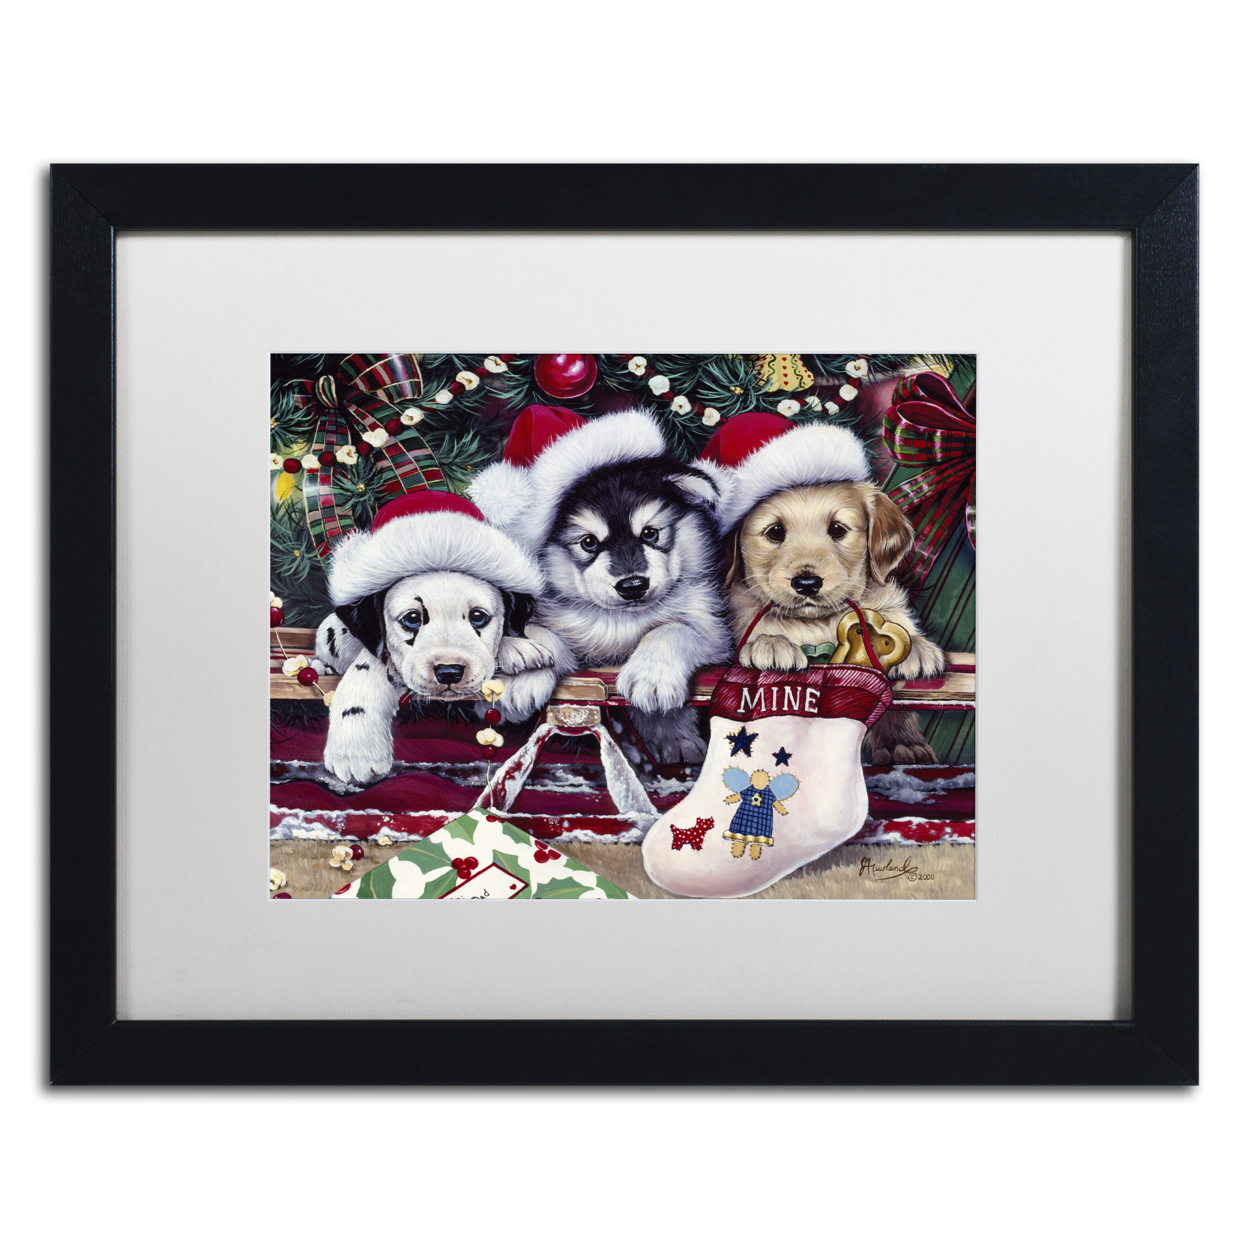 Jenny Newland 'A Tail Wagging Christmas' Black Wooden Framed Art 18 X 22 Inches